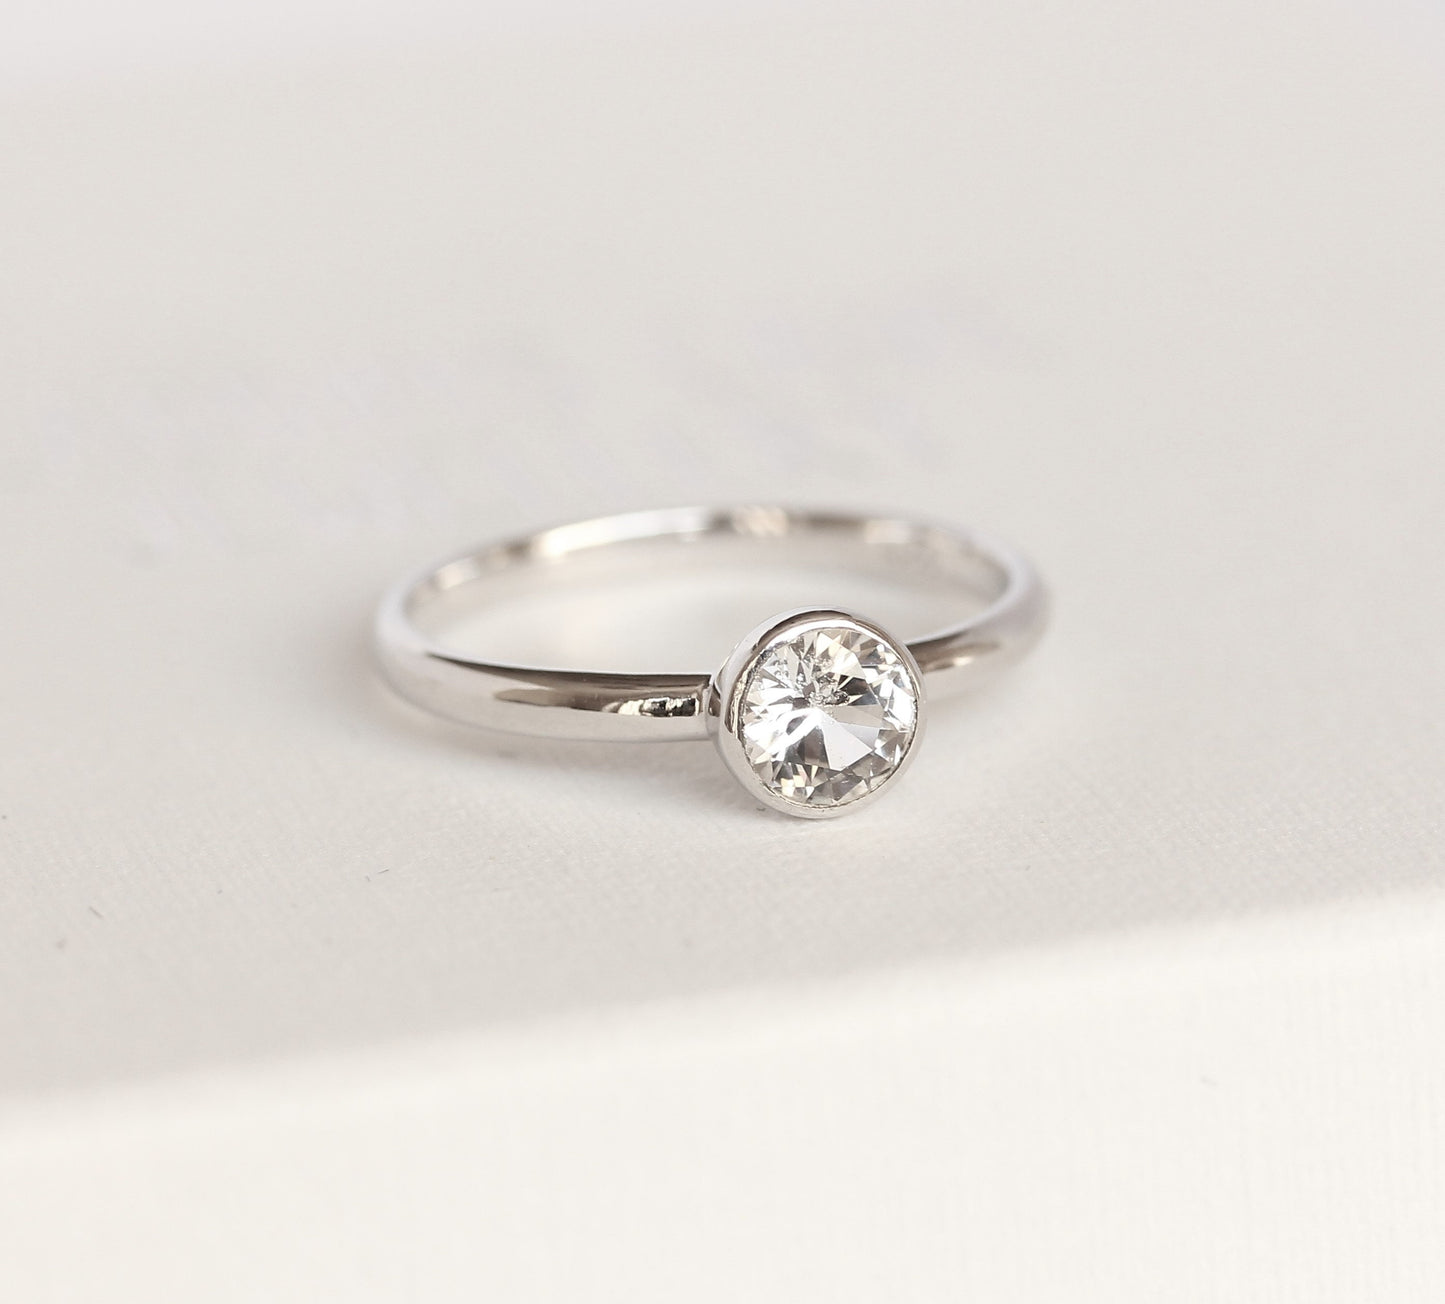 Simulated diamond bezel set solitaire ring - Available in white gold or sterling silver - handmade ring